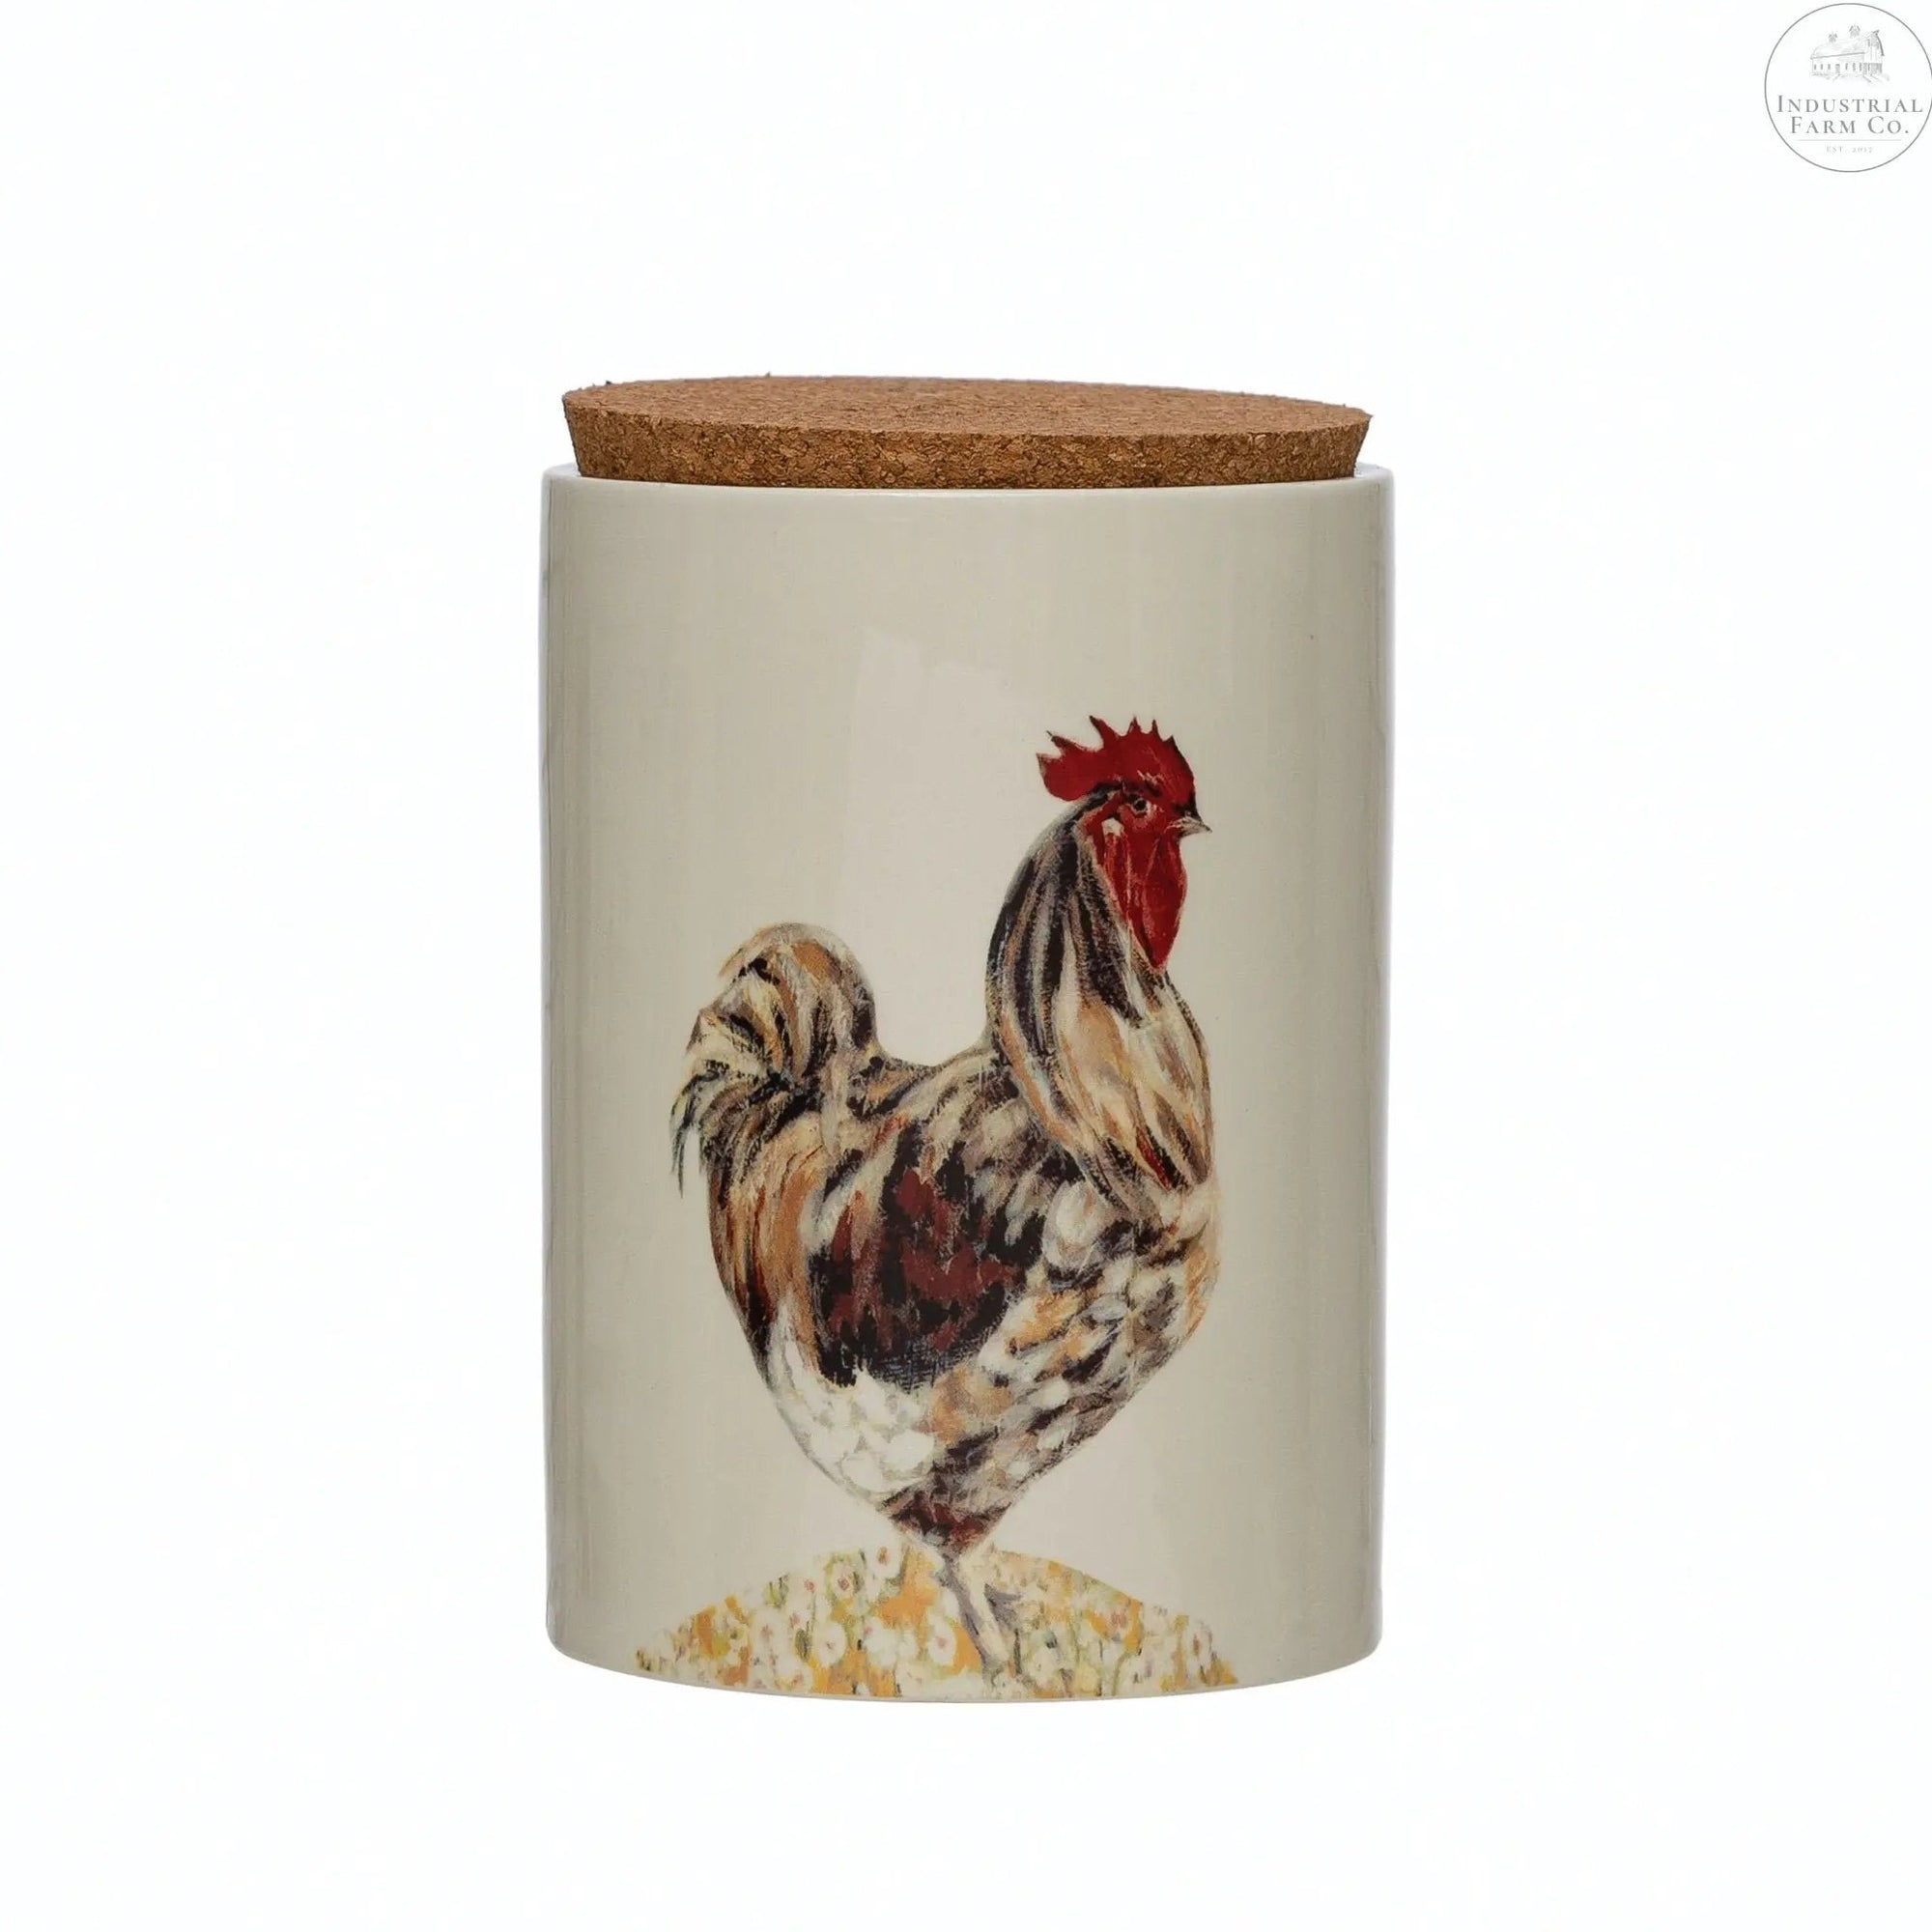 Rooster Canister | Industrial Farm Co